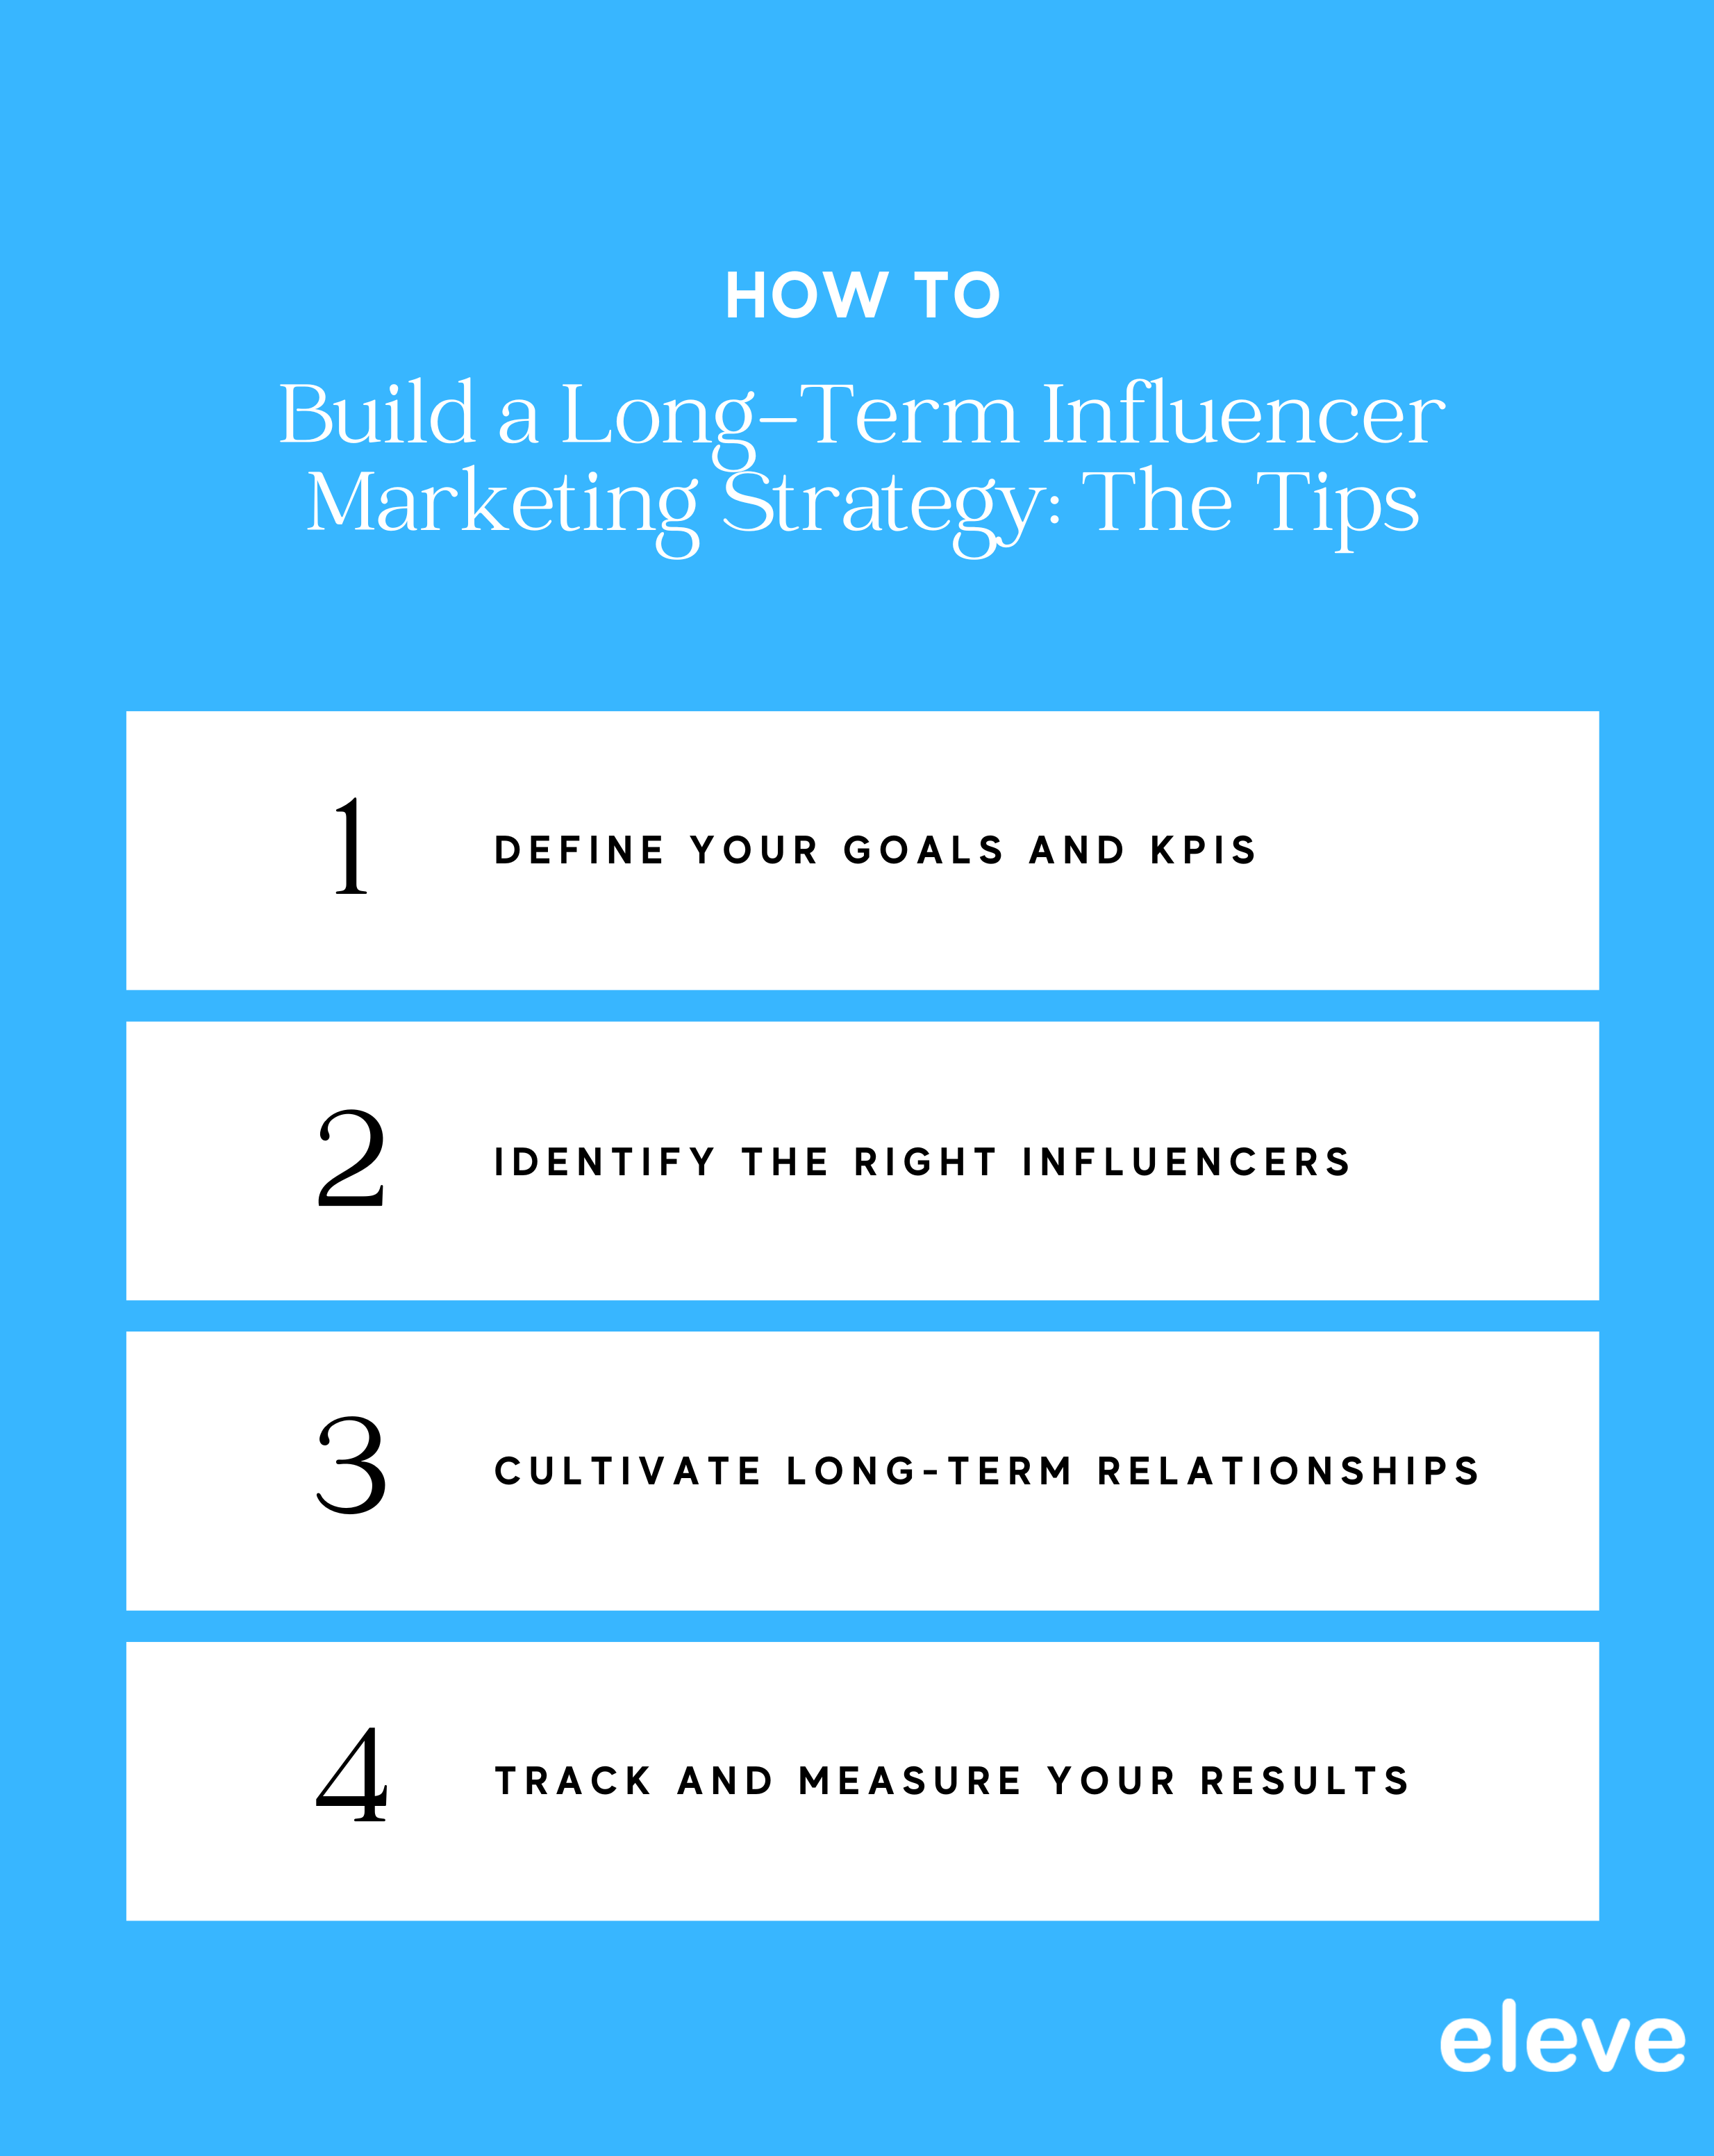 How To Build a Long-Term Influencer Marketing Strategy: The Tips